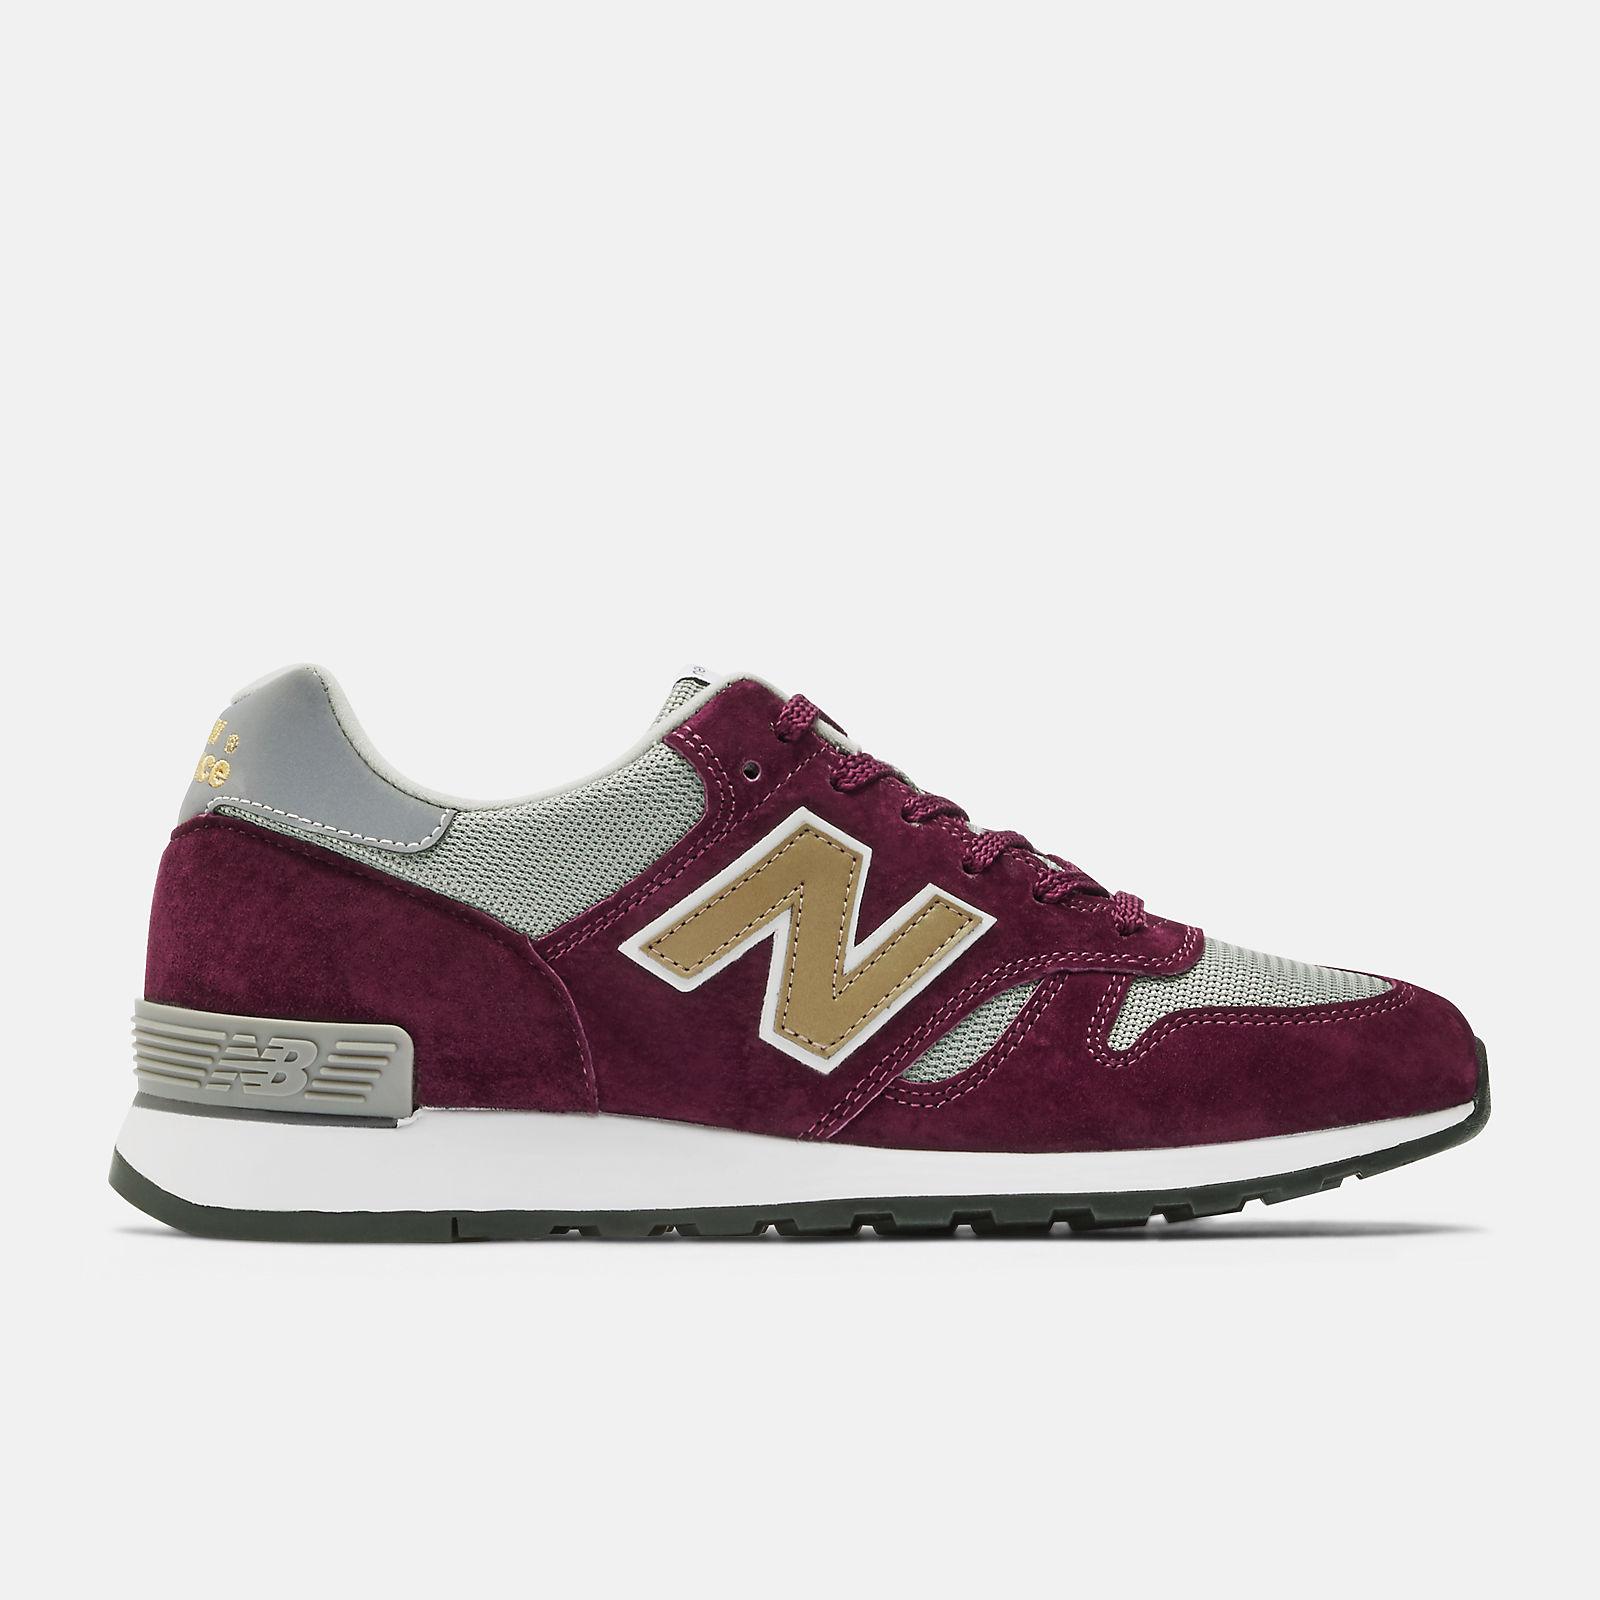 Men's Made in UK 670 Lifestyle Shoes - New Balance